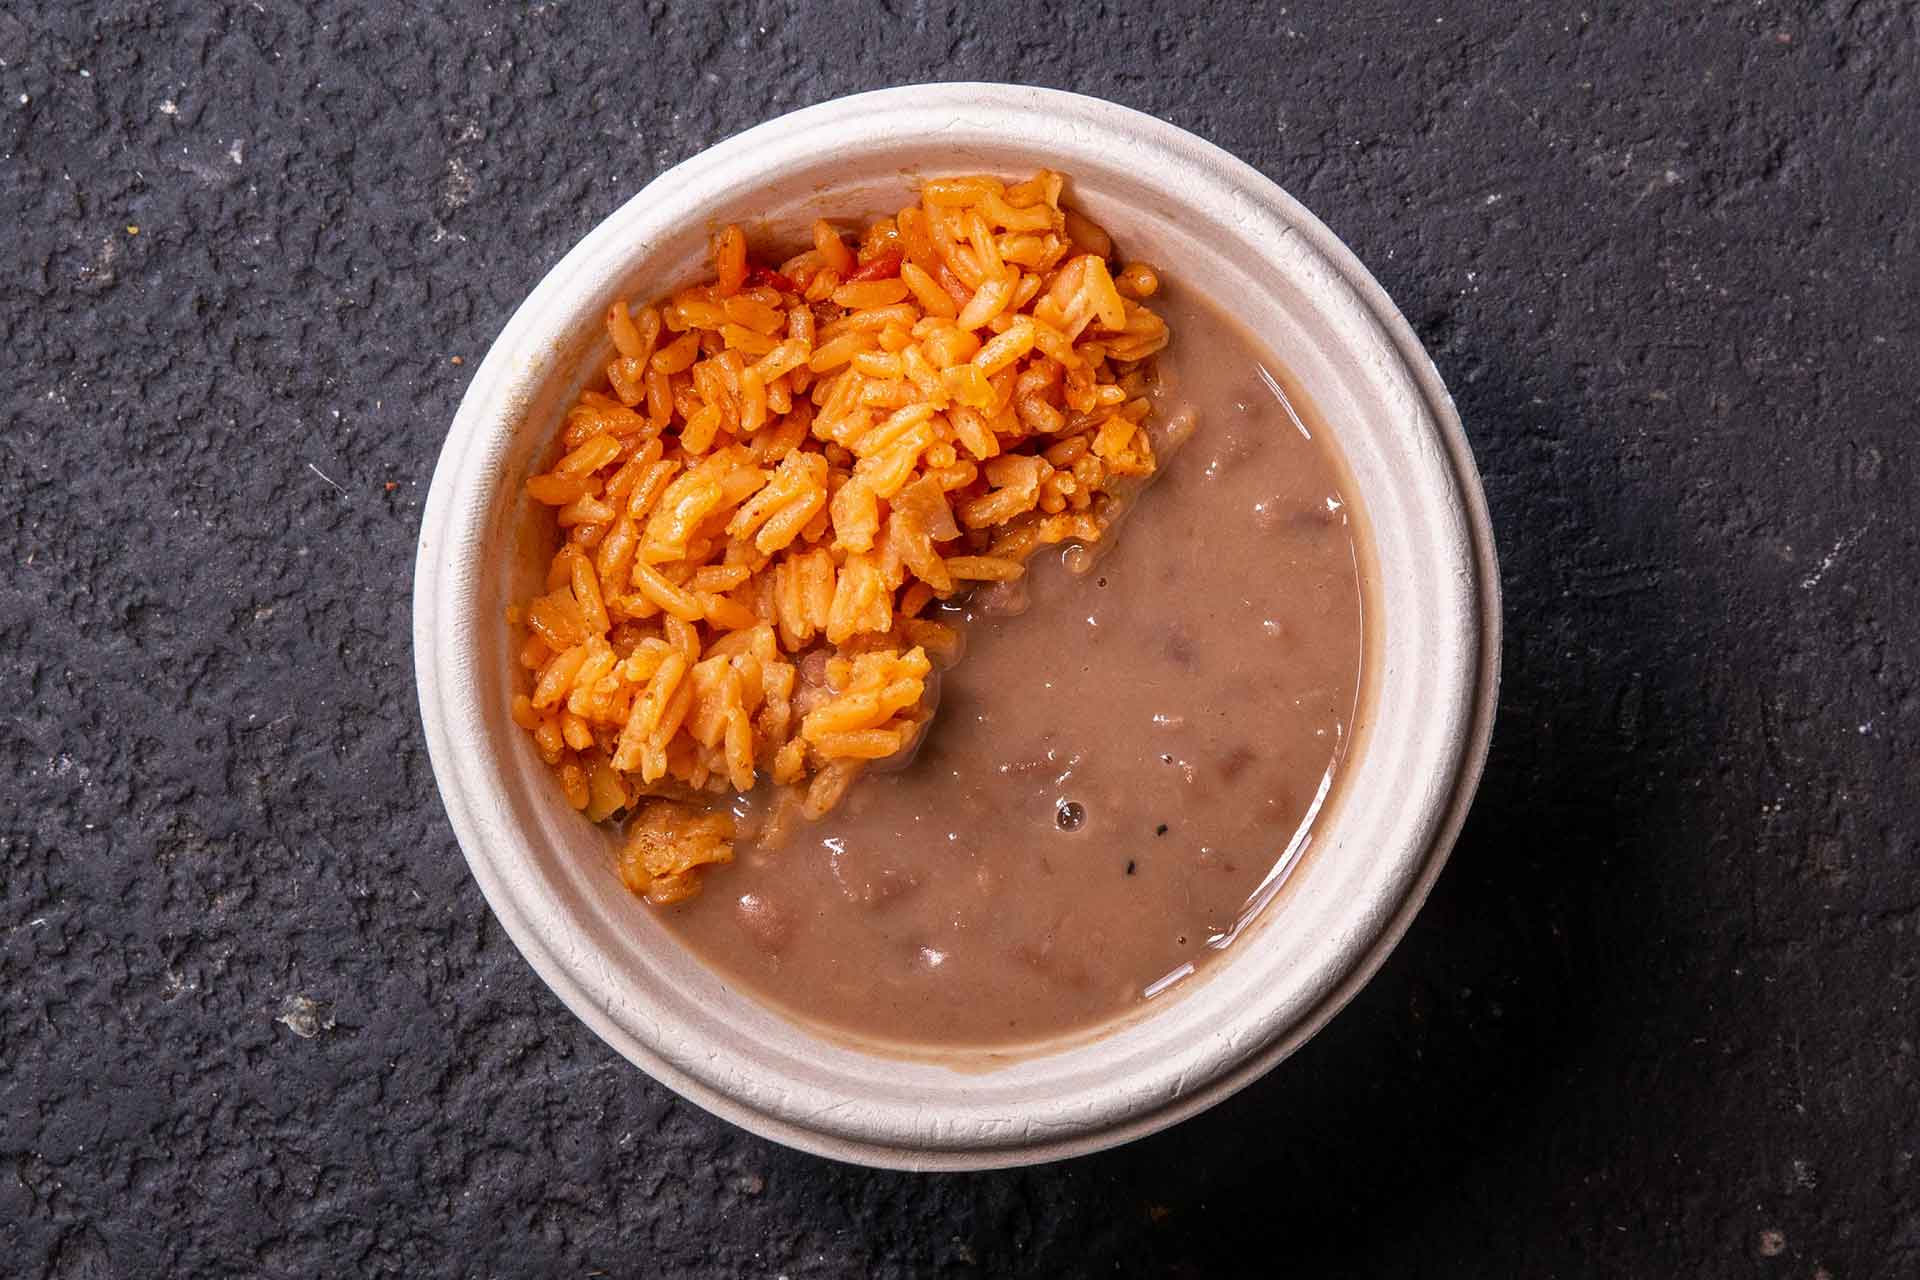 Rice and Beans - Hefty scoops of classic refried beans and Mexican yellow rice.